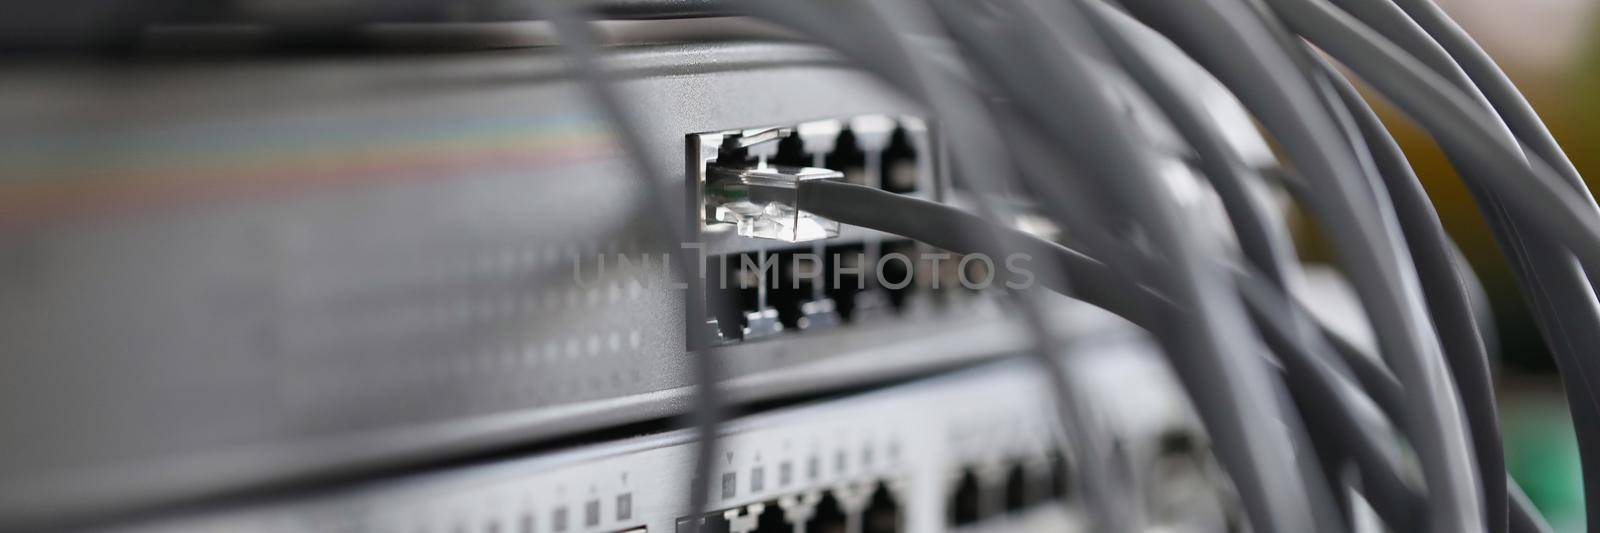 Optical mains cables connected to main server closeup by kuprevich